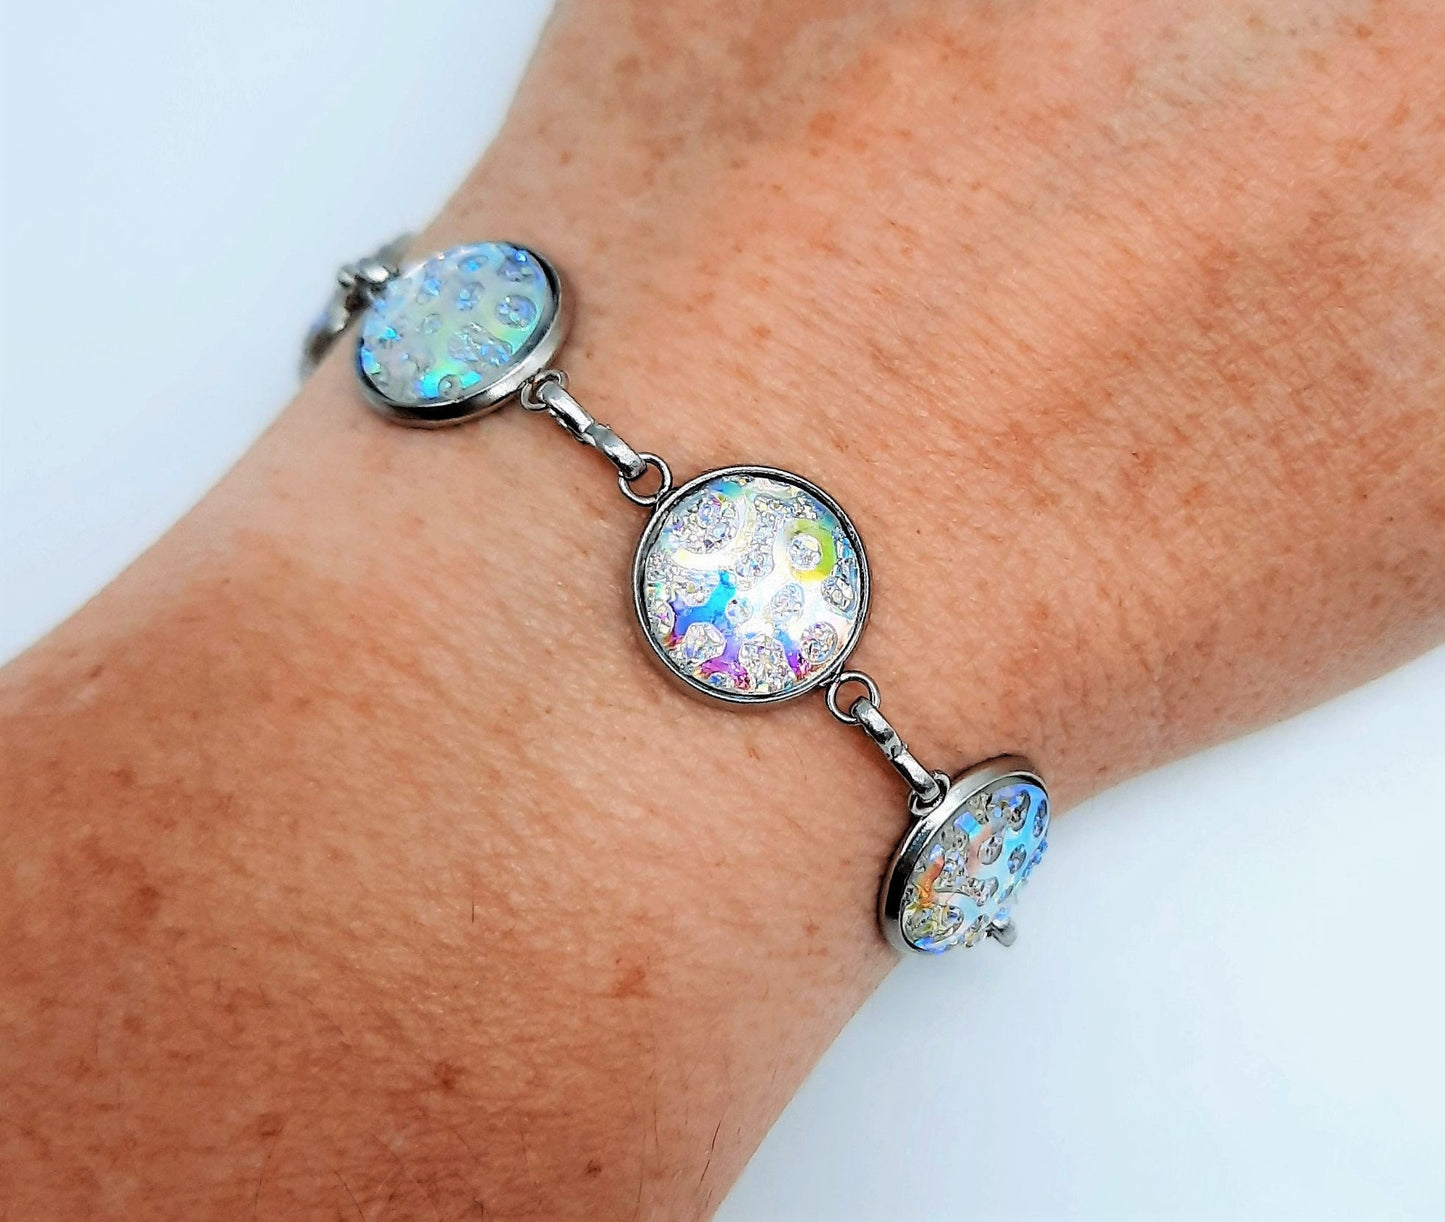 Handcrafted Iridescent White Resin Link Bracelet - Hypoallergenic Silver Stainless Steel - Adjustable Fit - Lobster Claw Closure